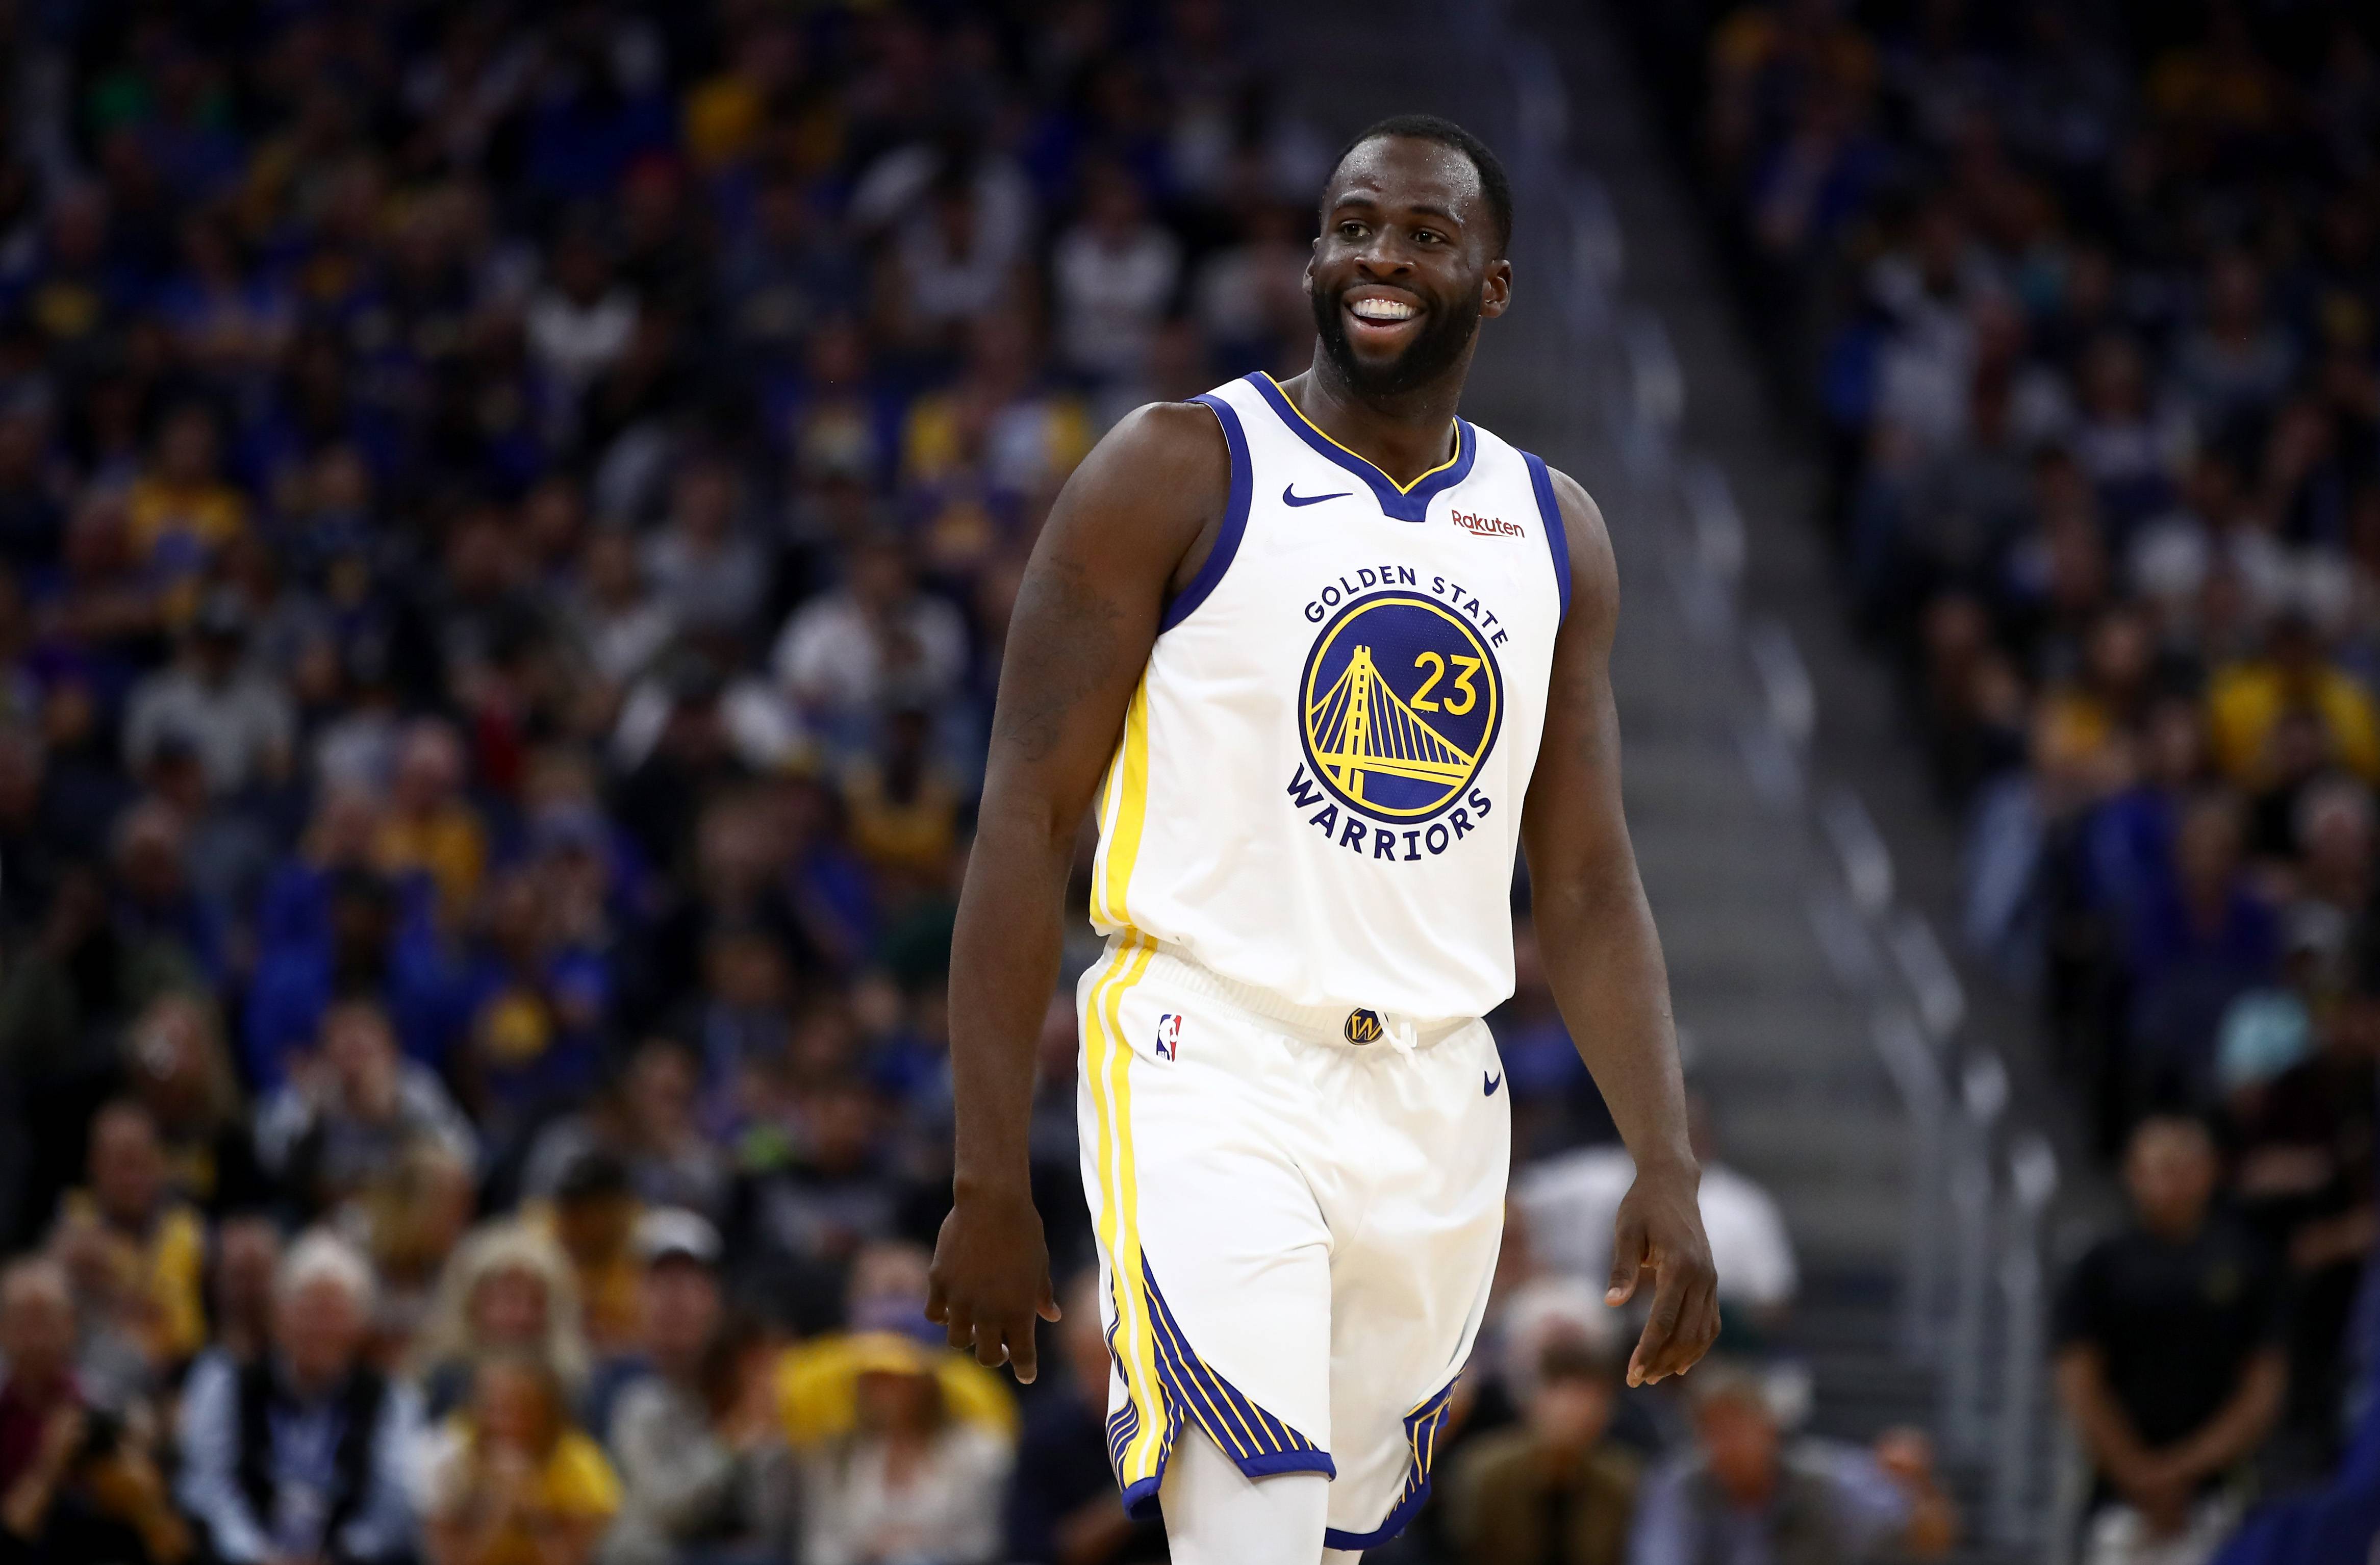 SAN FRANCISCO, CALIFORNIA - OCTOBER 05:  Draymond Green #23 of the Golden State Warriors smiles during their game against the Los Angeles Lakers at Chase Center on October 05, 2019 in San Francisco, California.  NOTE TO USER: User expressly acknowledges and agrees that, by downloading and or using this photograph, User is consenting to the terms and conditions of the Getty Images License Agreement.  (Photo by Ezra Shaw/Getty Images)